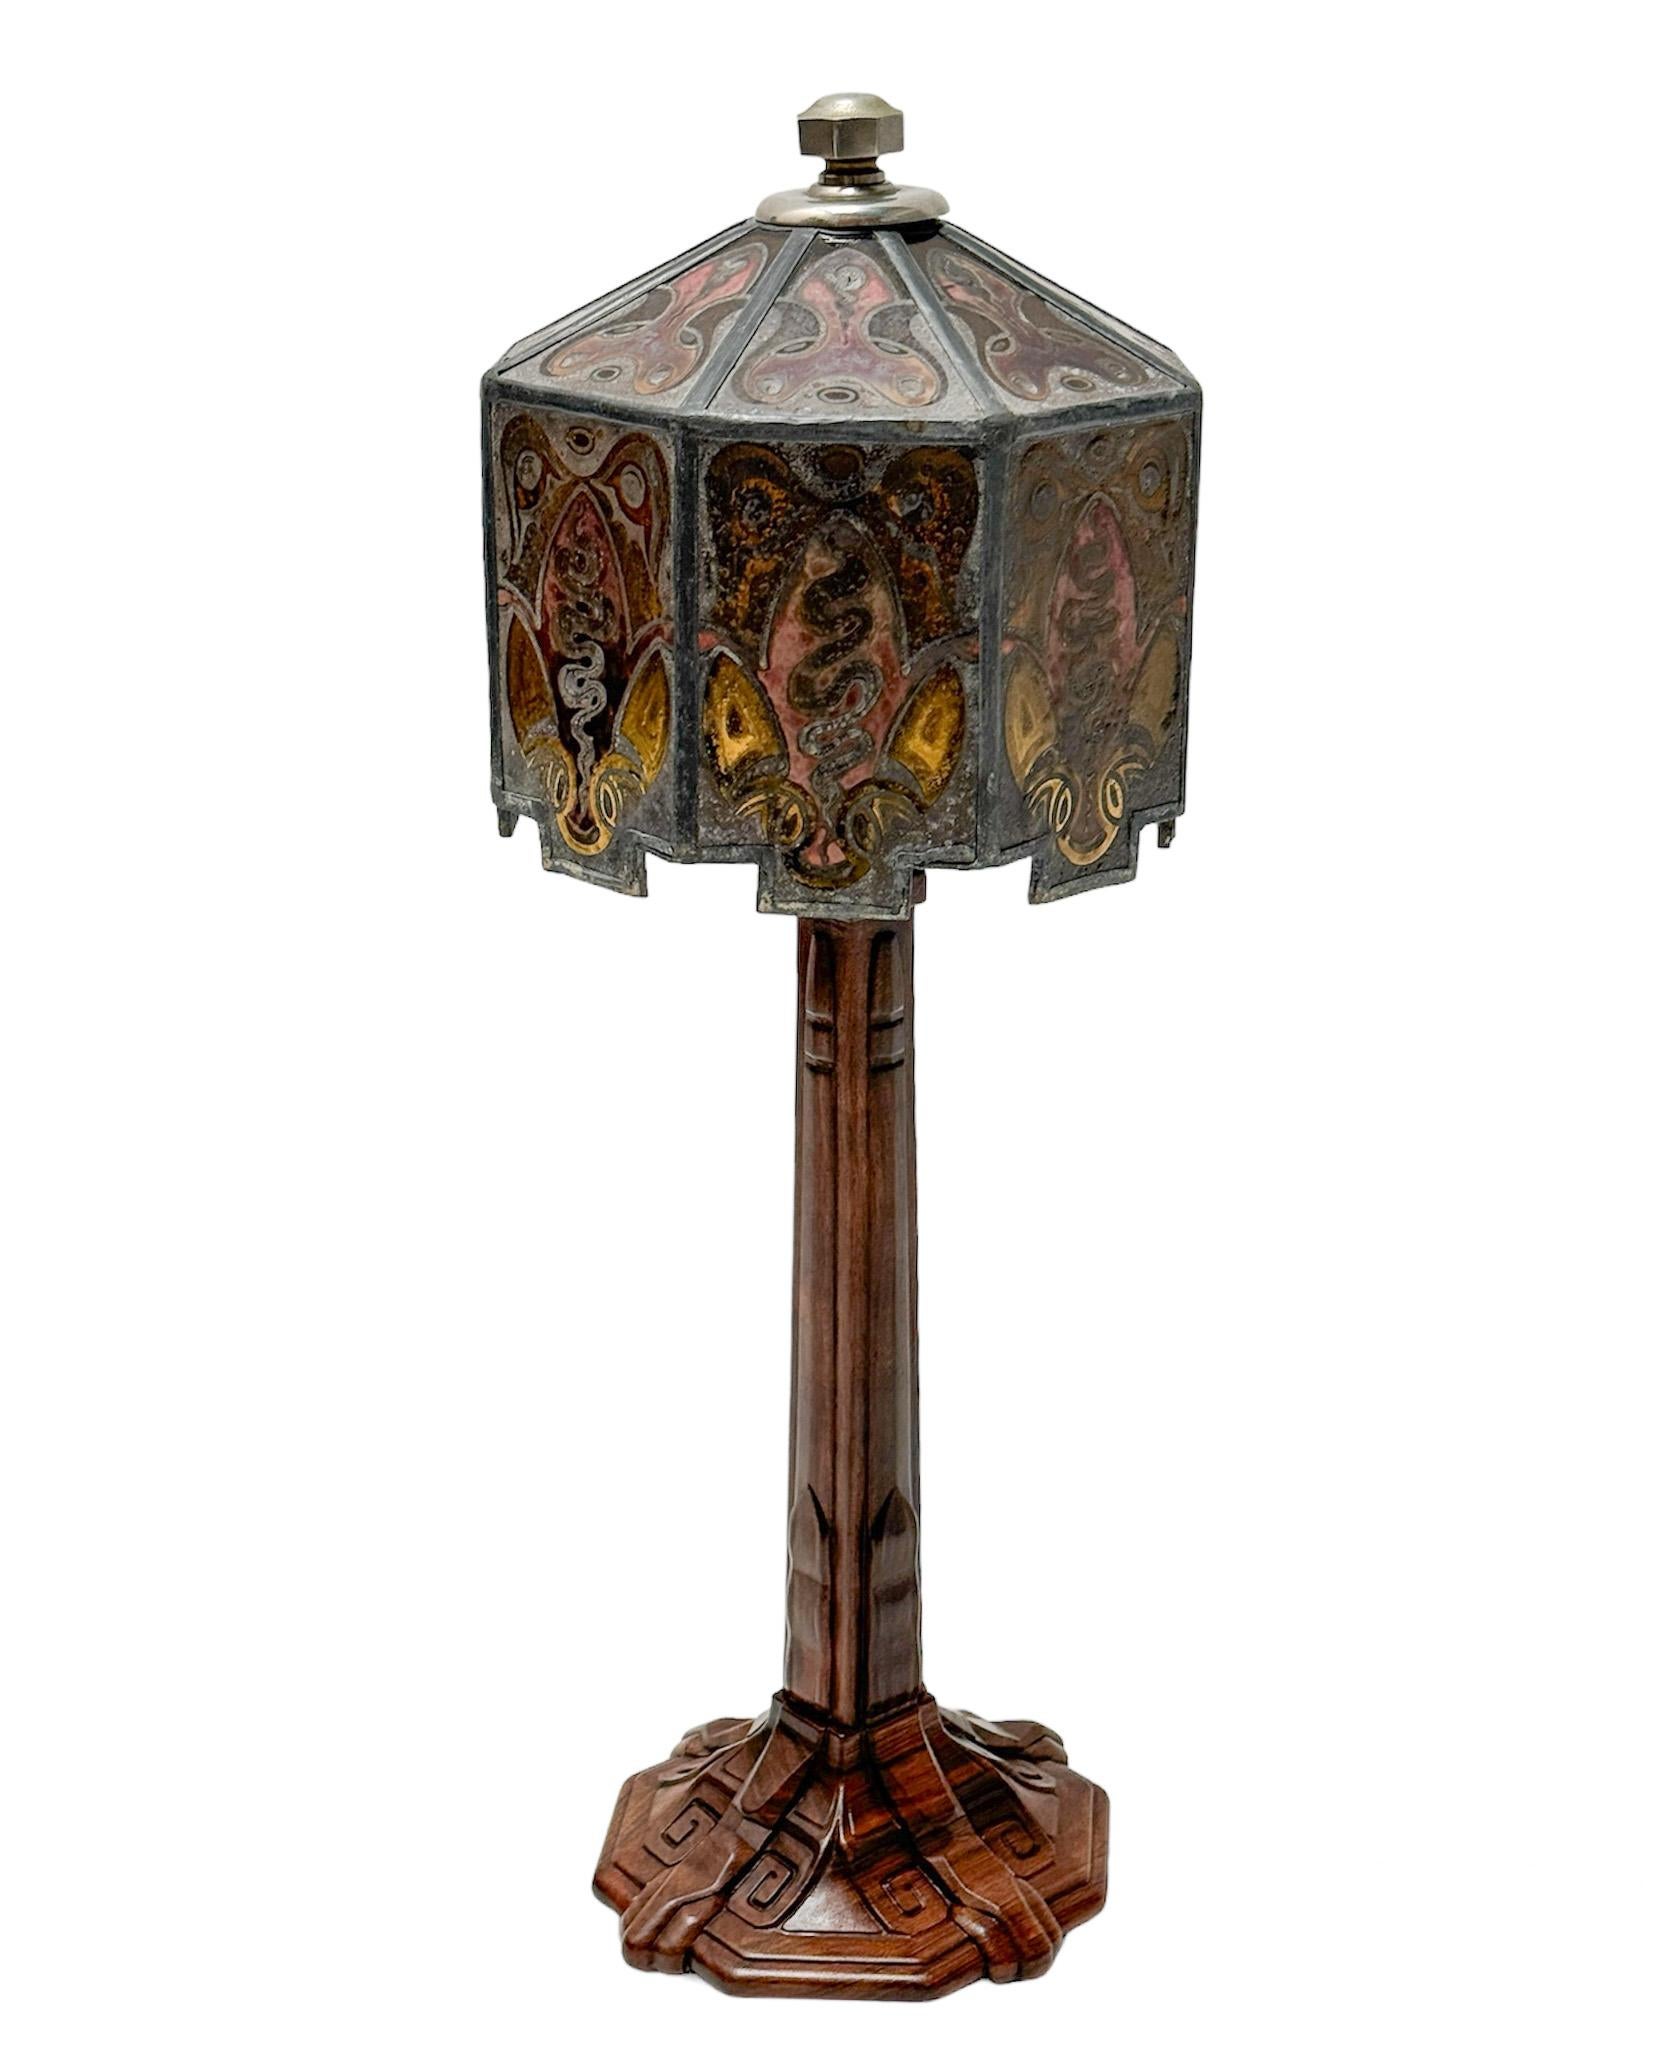 Magnificent and rare Art Deco Amsterdamse School table lamp.
Design by Napoleon Le Grand for Modelhuis Legrand Amsterdam.
Striking Dutch design from the 1920s.
Stylish solid walnut base with decorative stained glass shade.
Rewired with three small